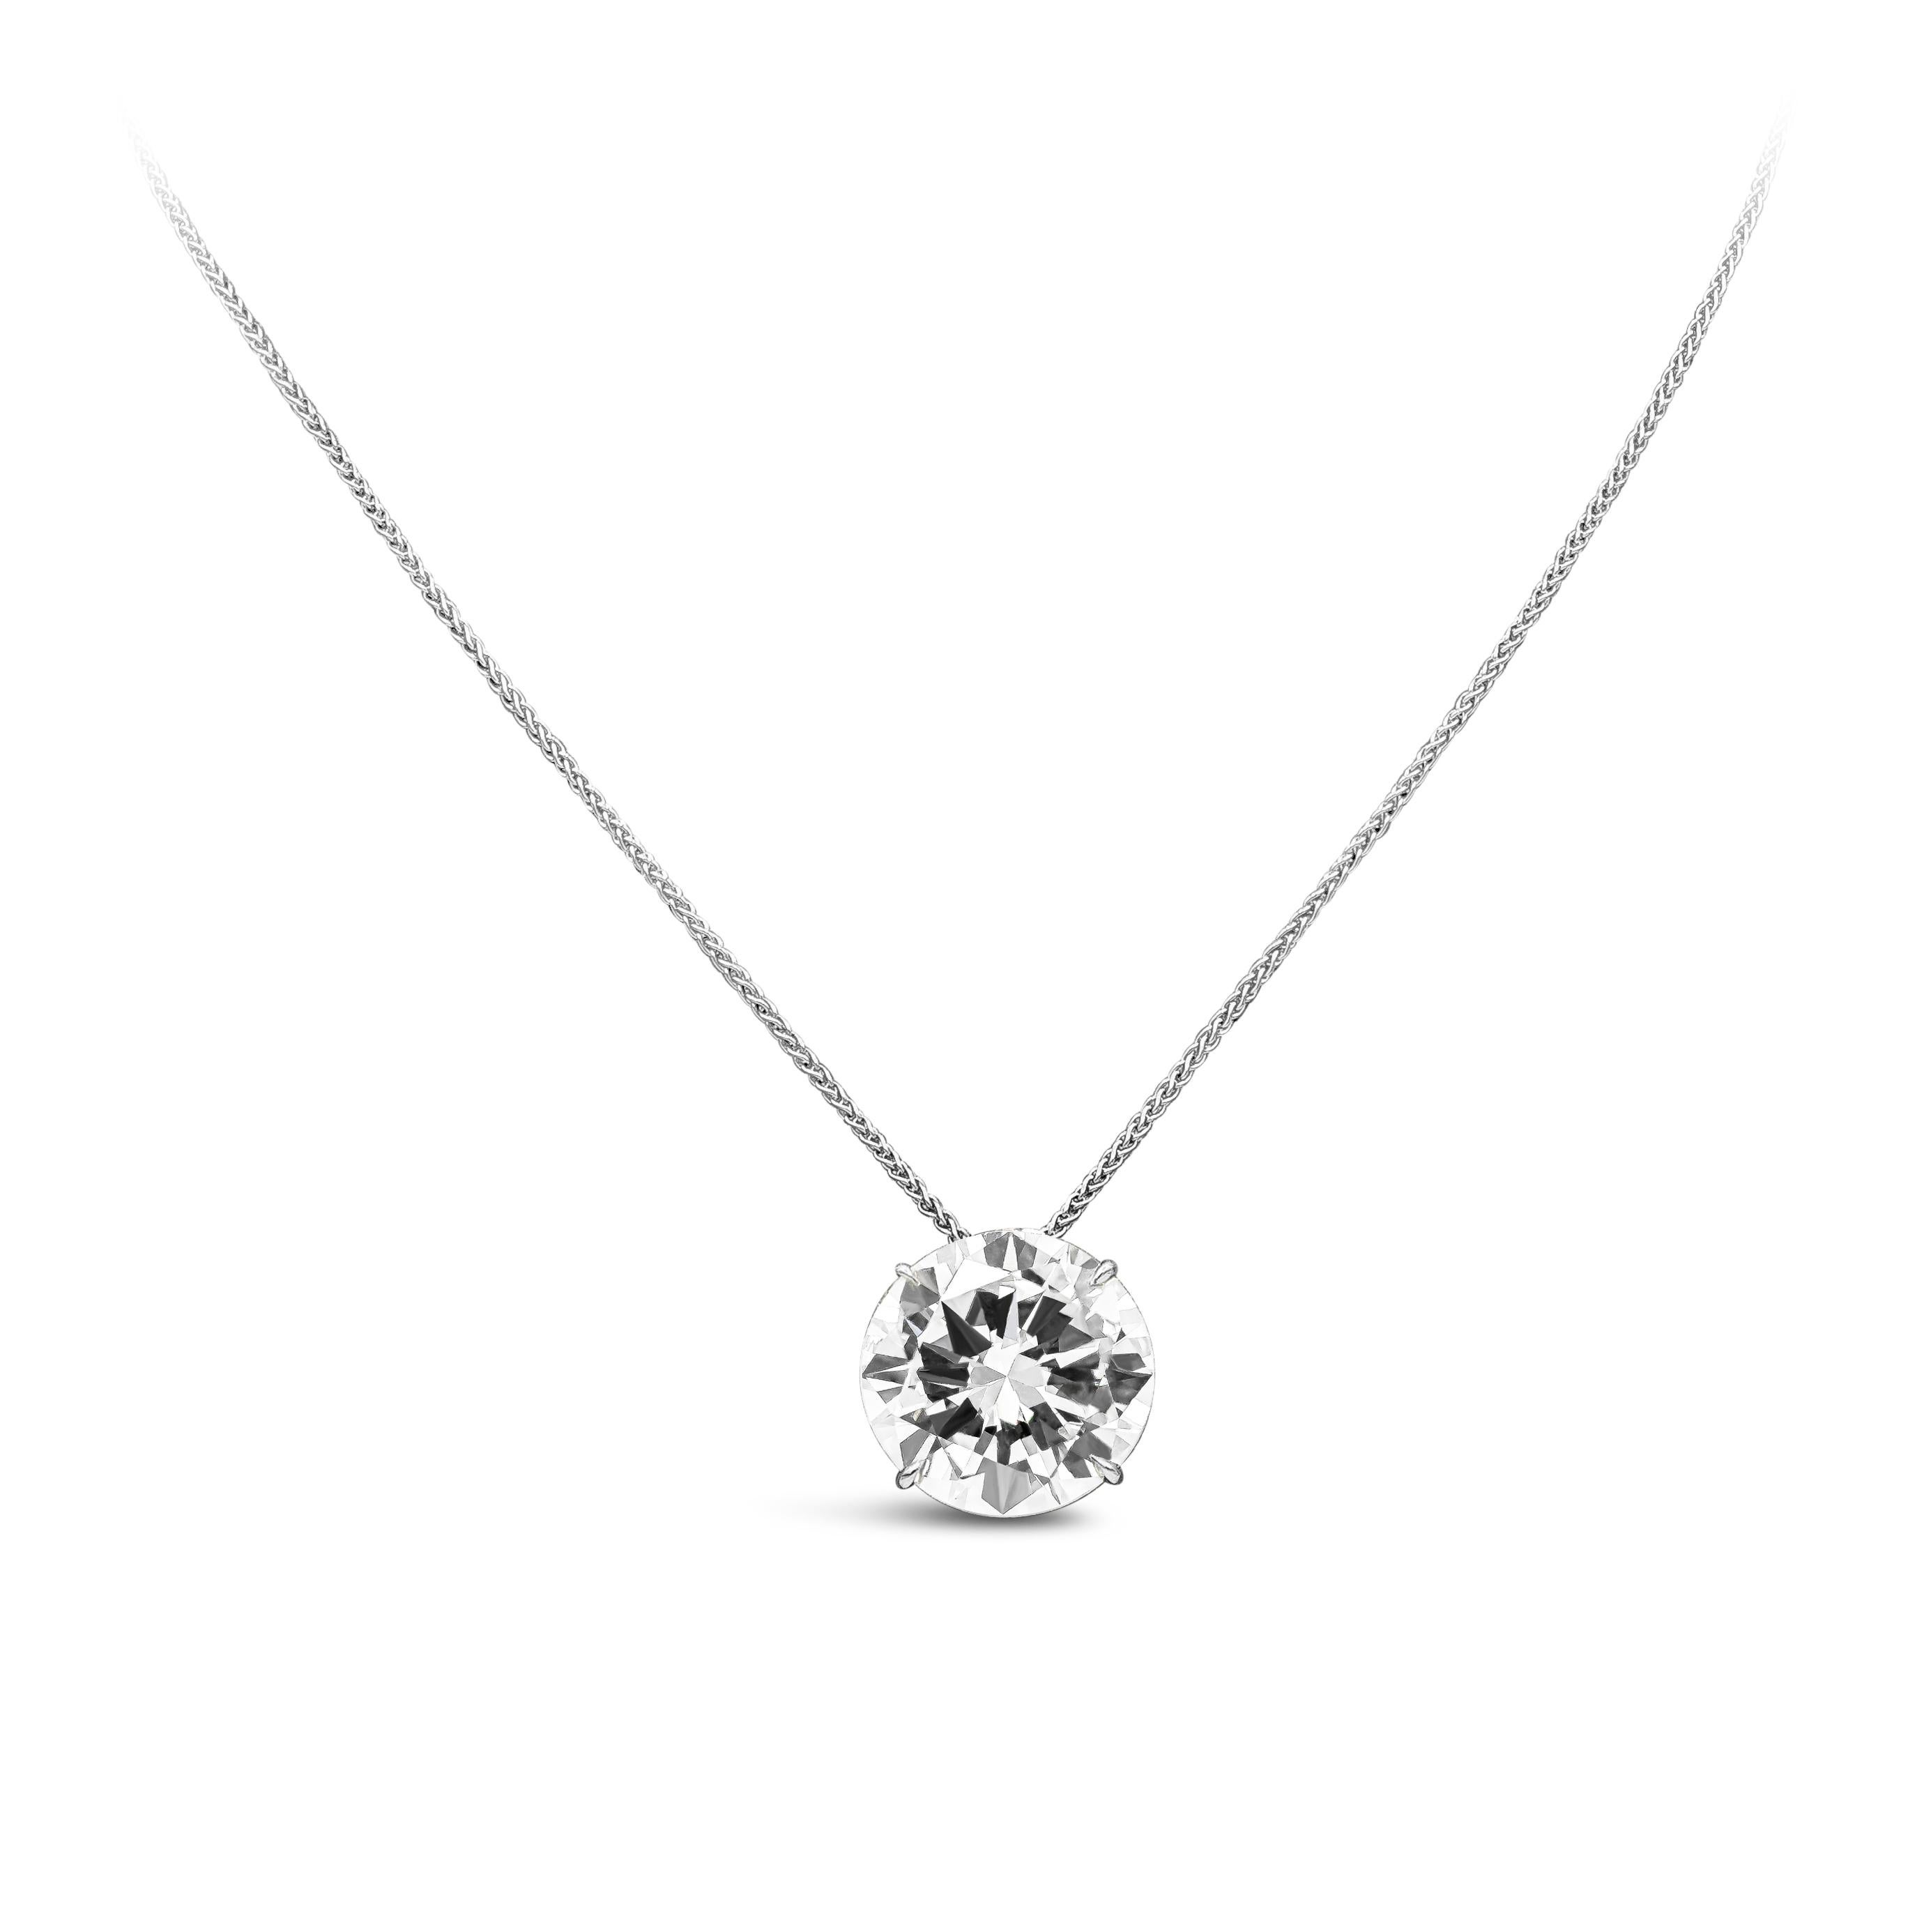 A bold and classy pendant necklace showcasing a luxurious 9.17 carats brilliant round diamond certified by GIA as S-T color, VVS2 in clarity. Set in a four prong basket setting and made in platinum. Suspended on an 18 inch spiga / wheat chain made